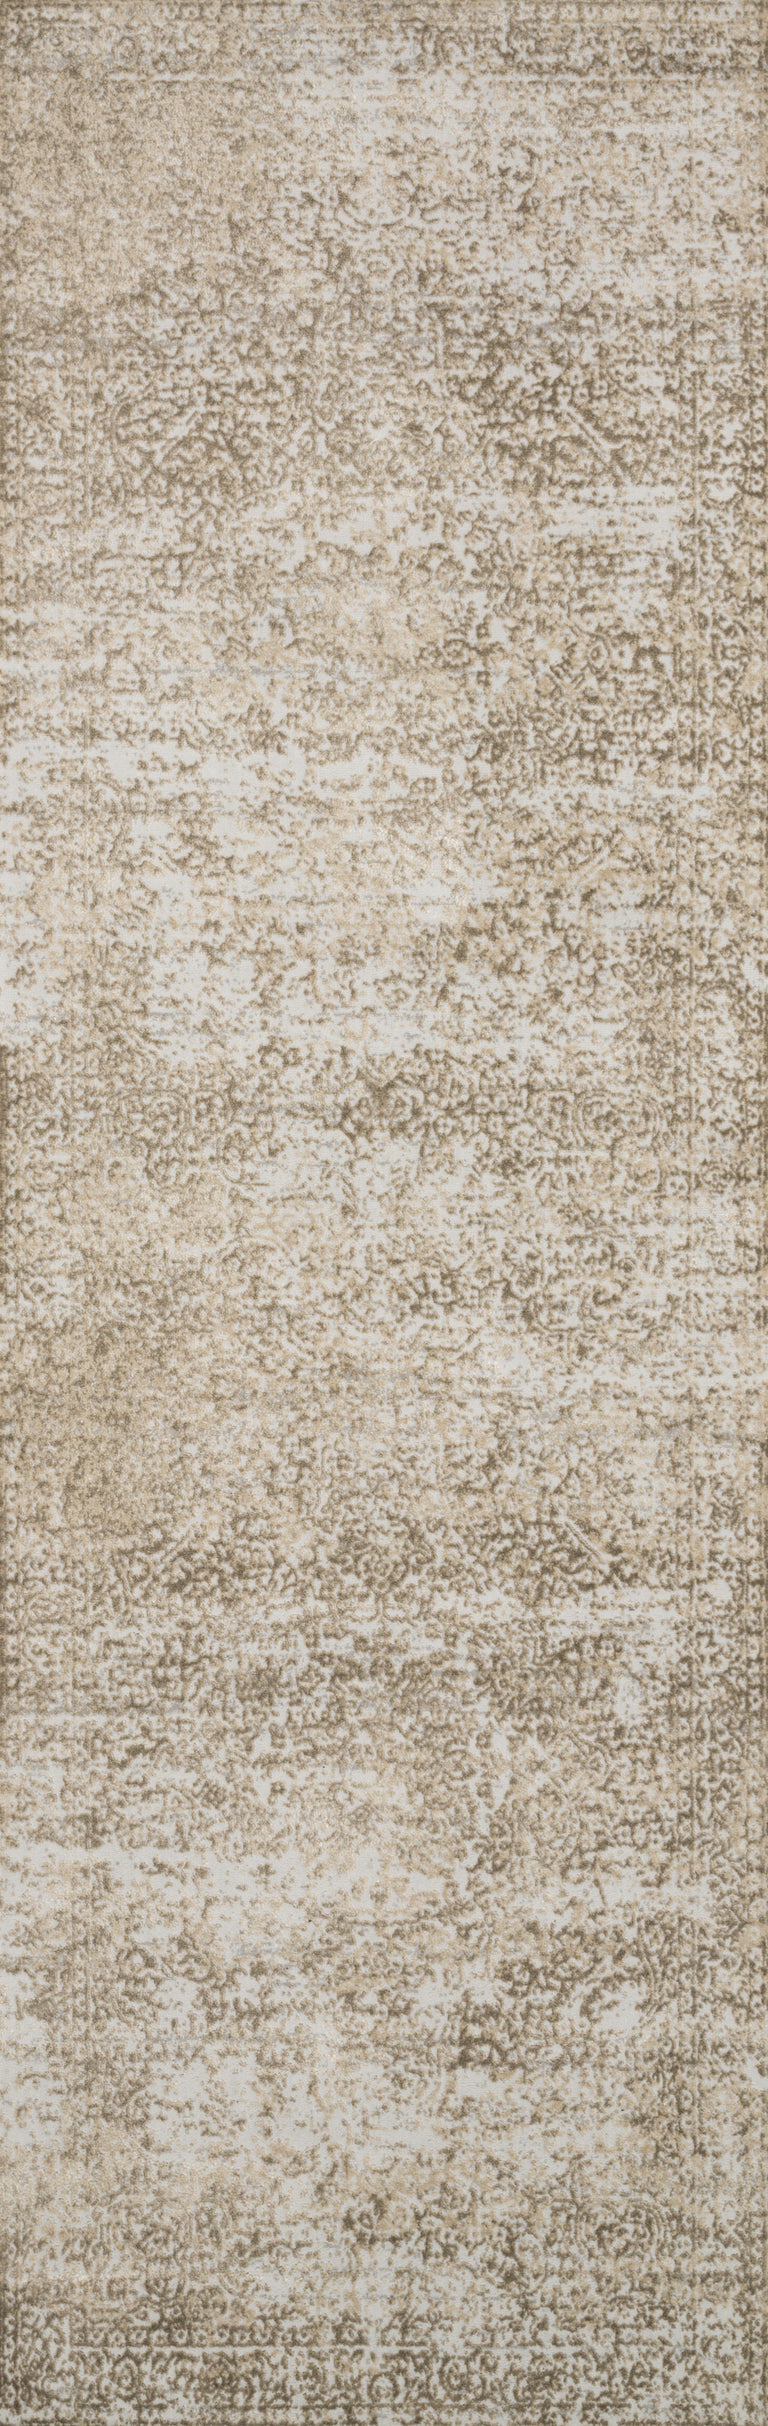 Loloi Rugs Patina Collection Rug in Champagne, Lt. Grey - 6'7" x 9'2"